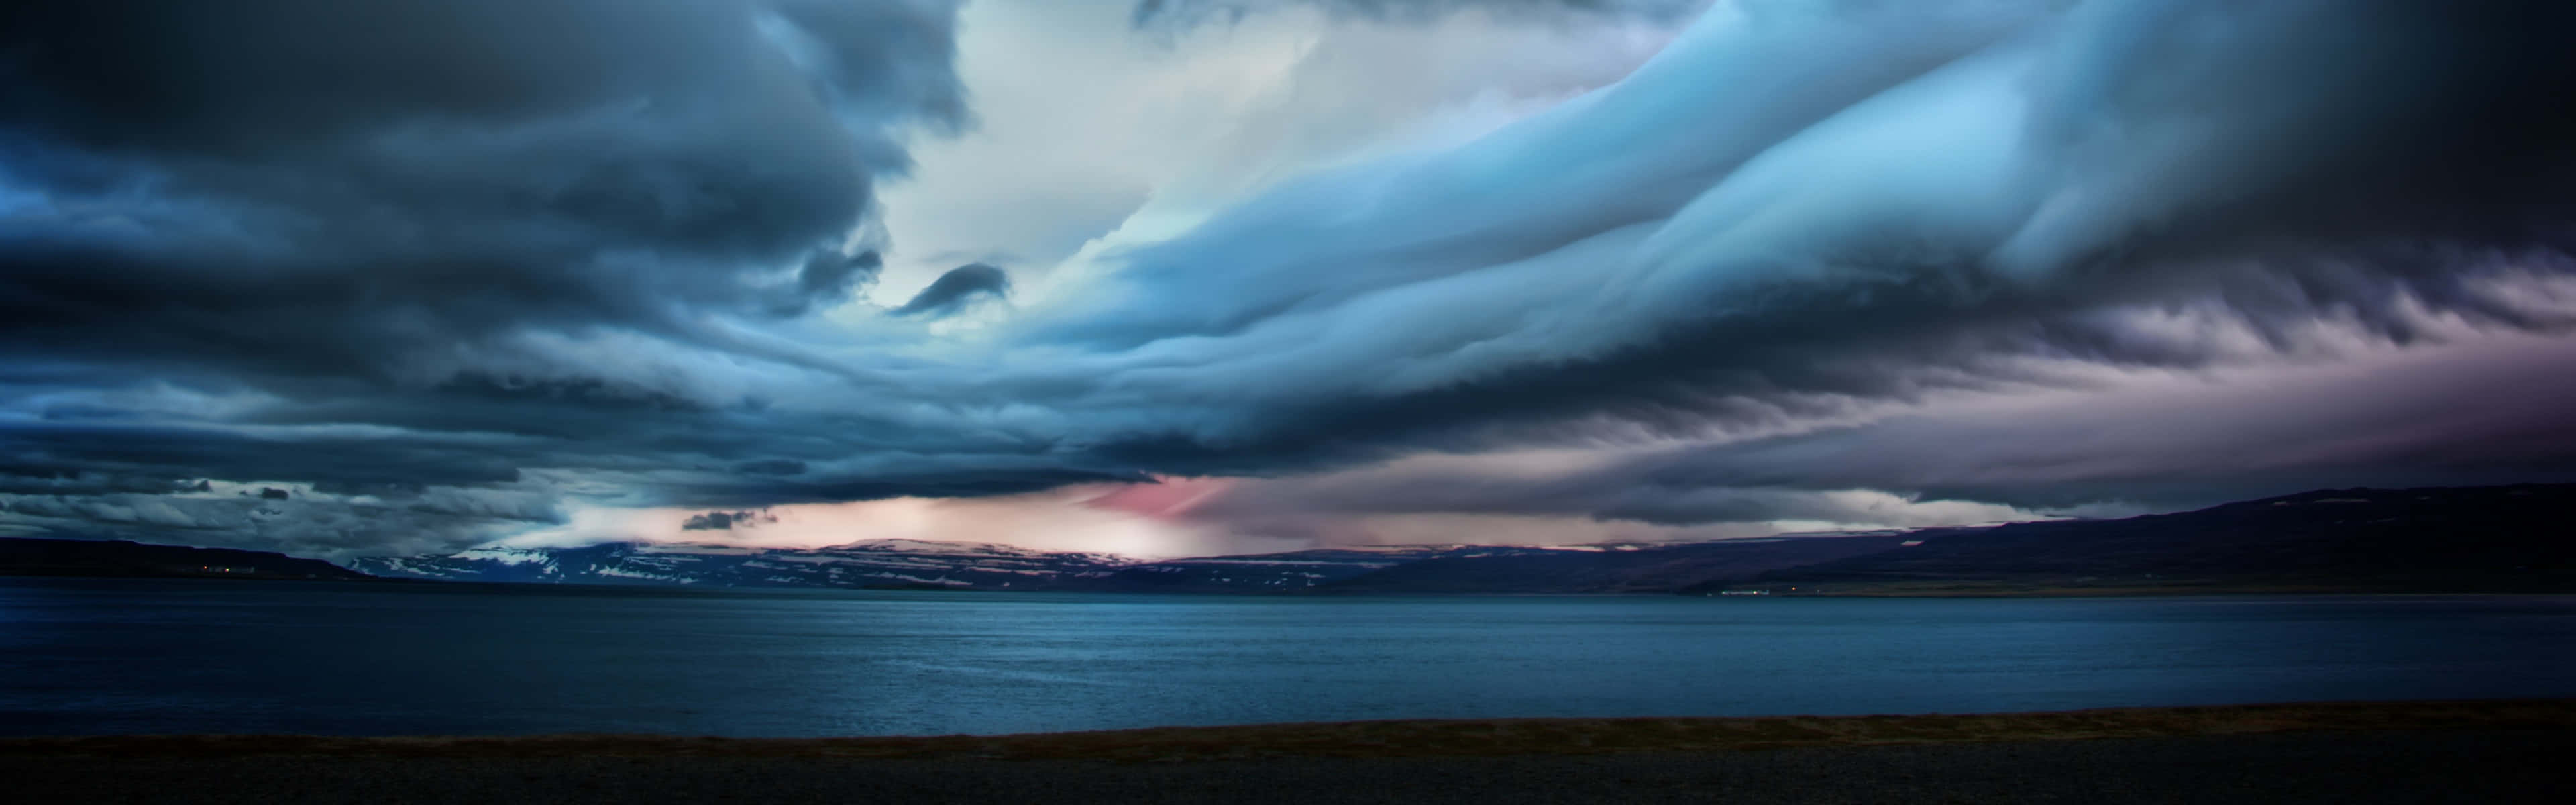 A Stormy Sky Over A Lake And Mountains Background